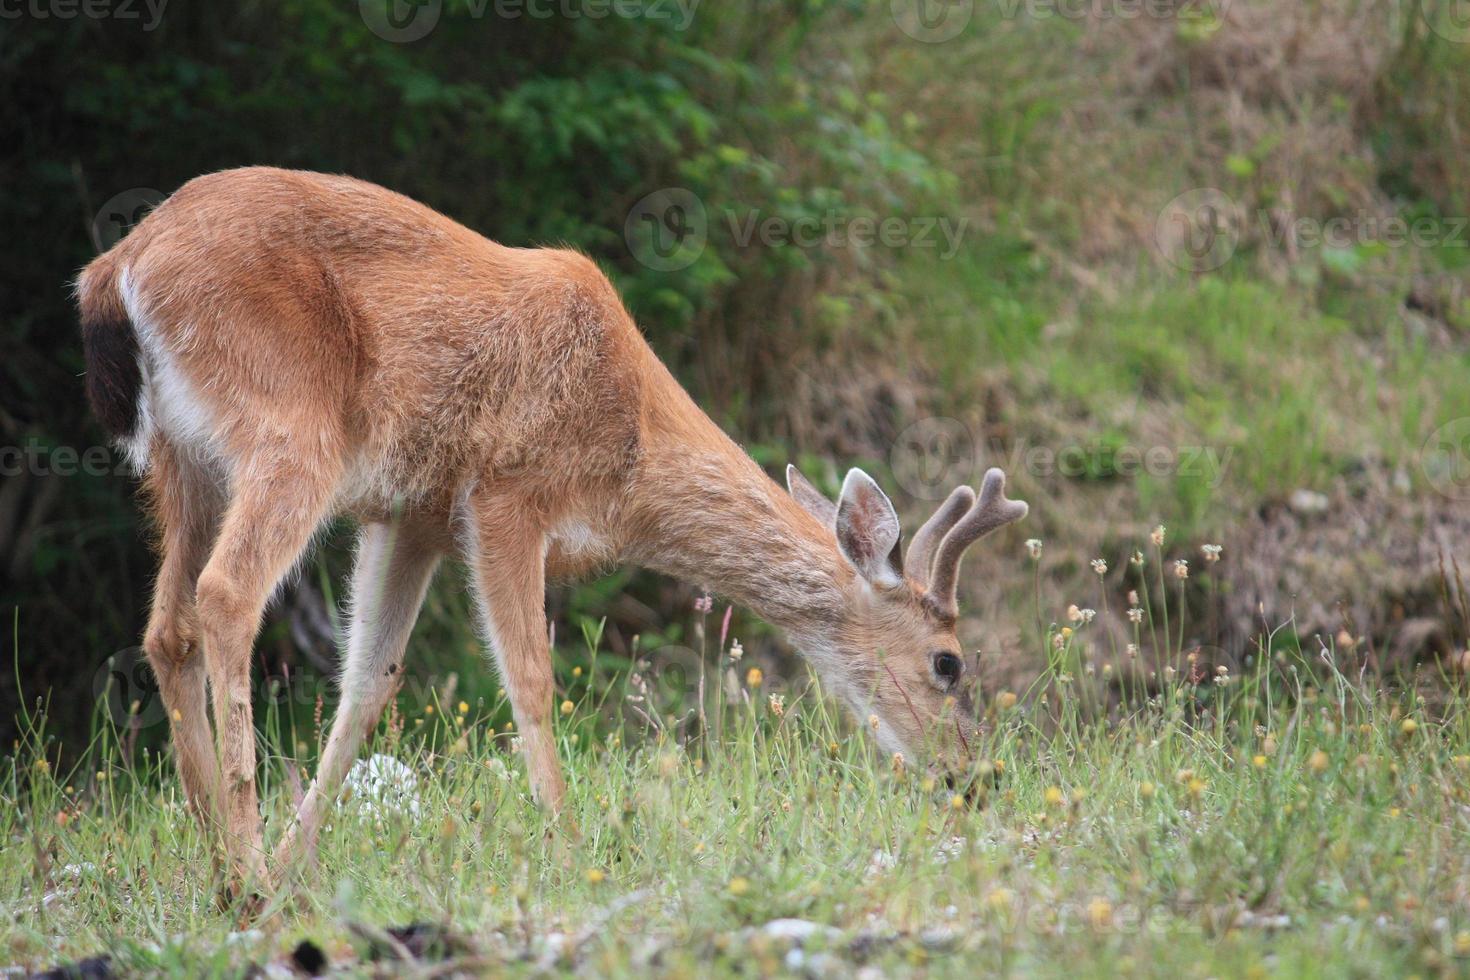 A young deer eating photo